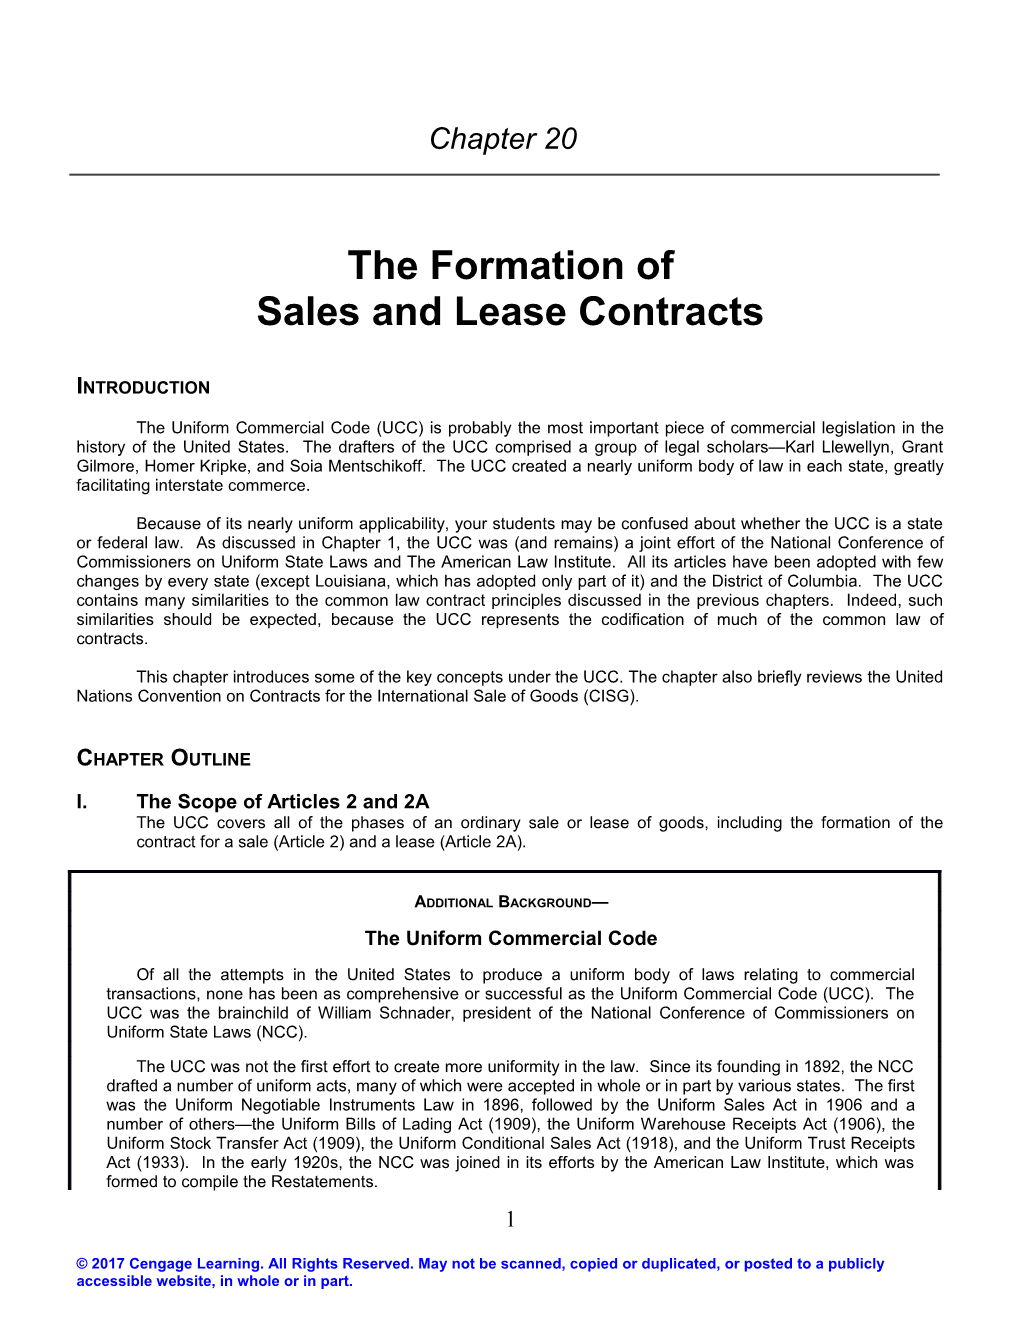 Chapter 17: the Formation of Sales and Lease Contracts 3